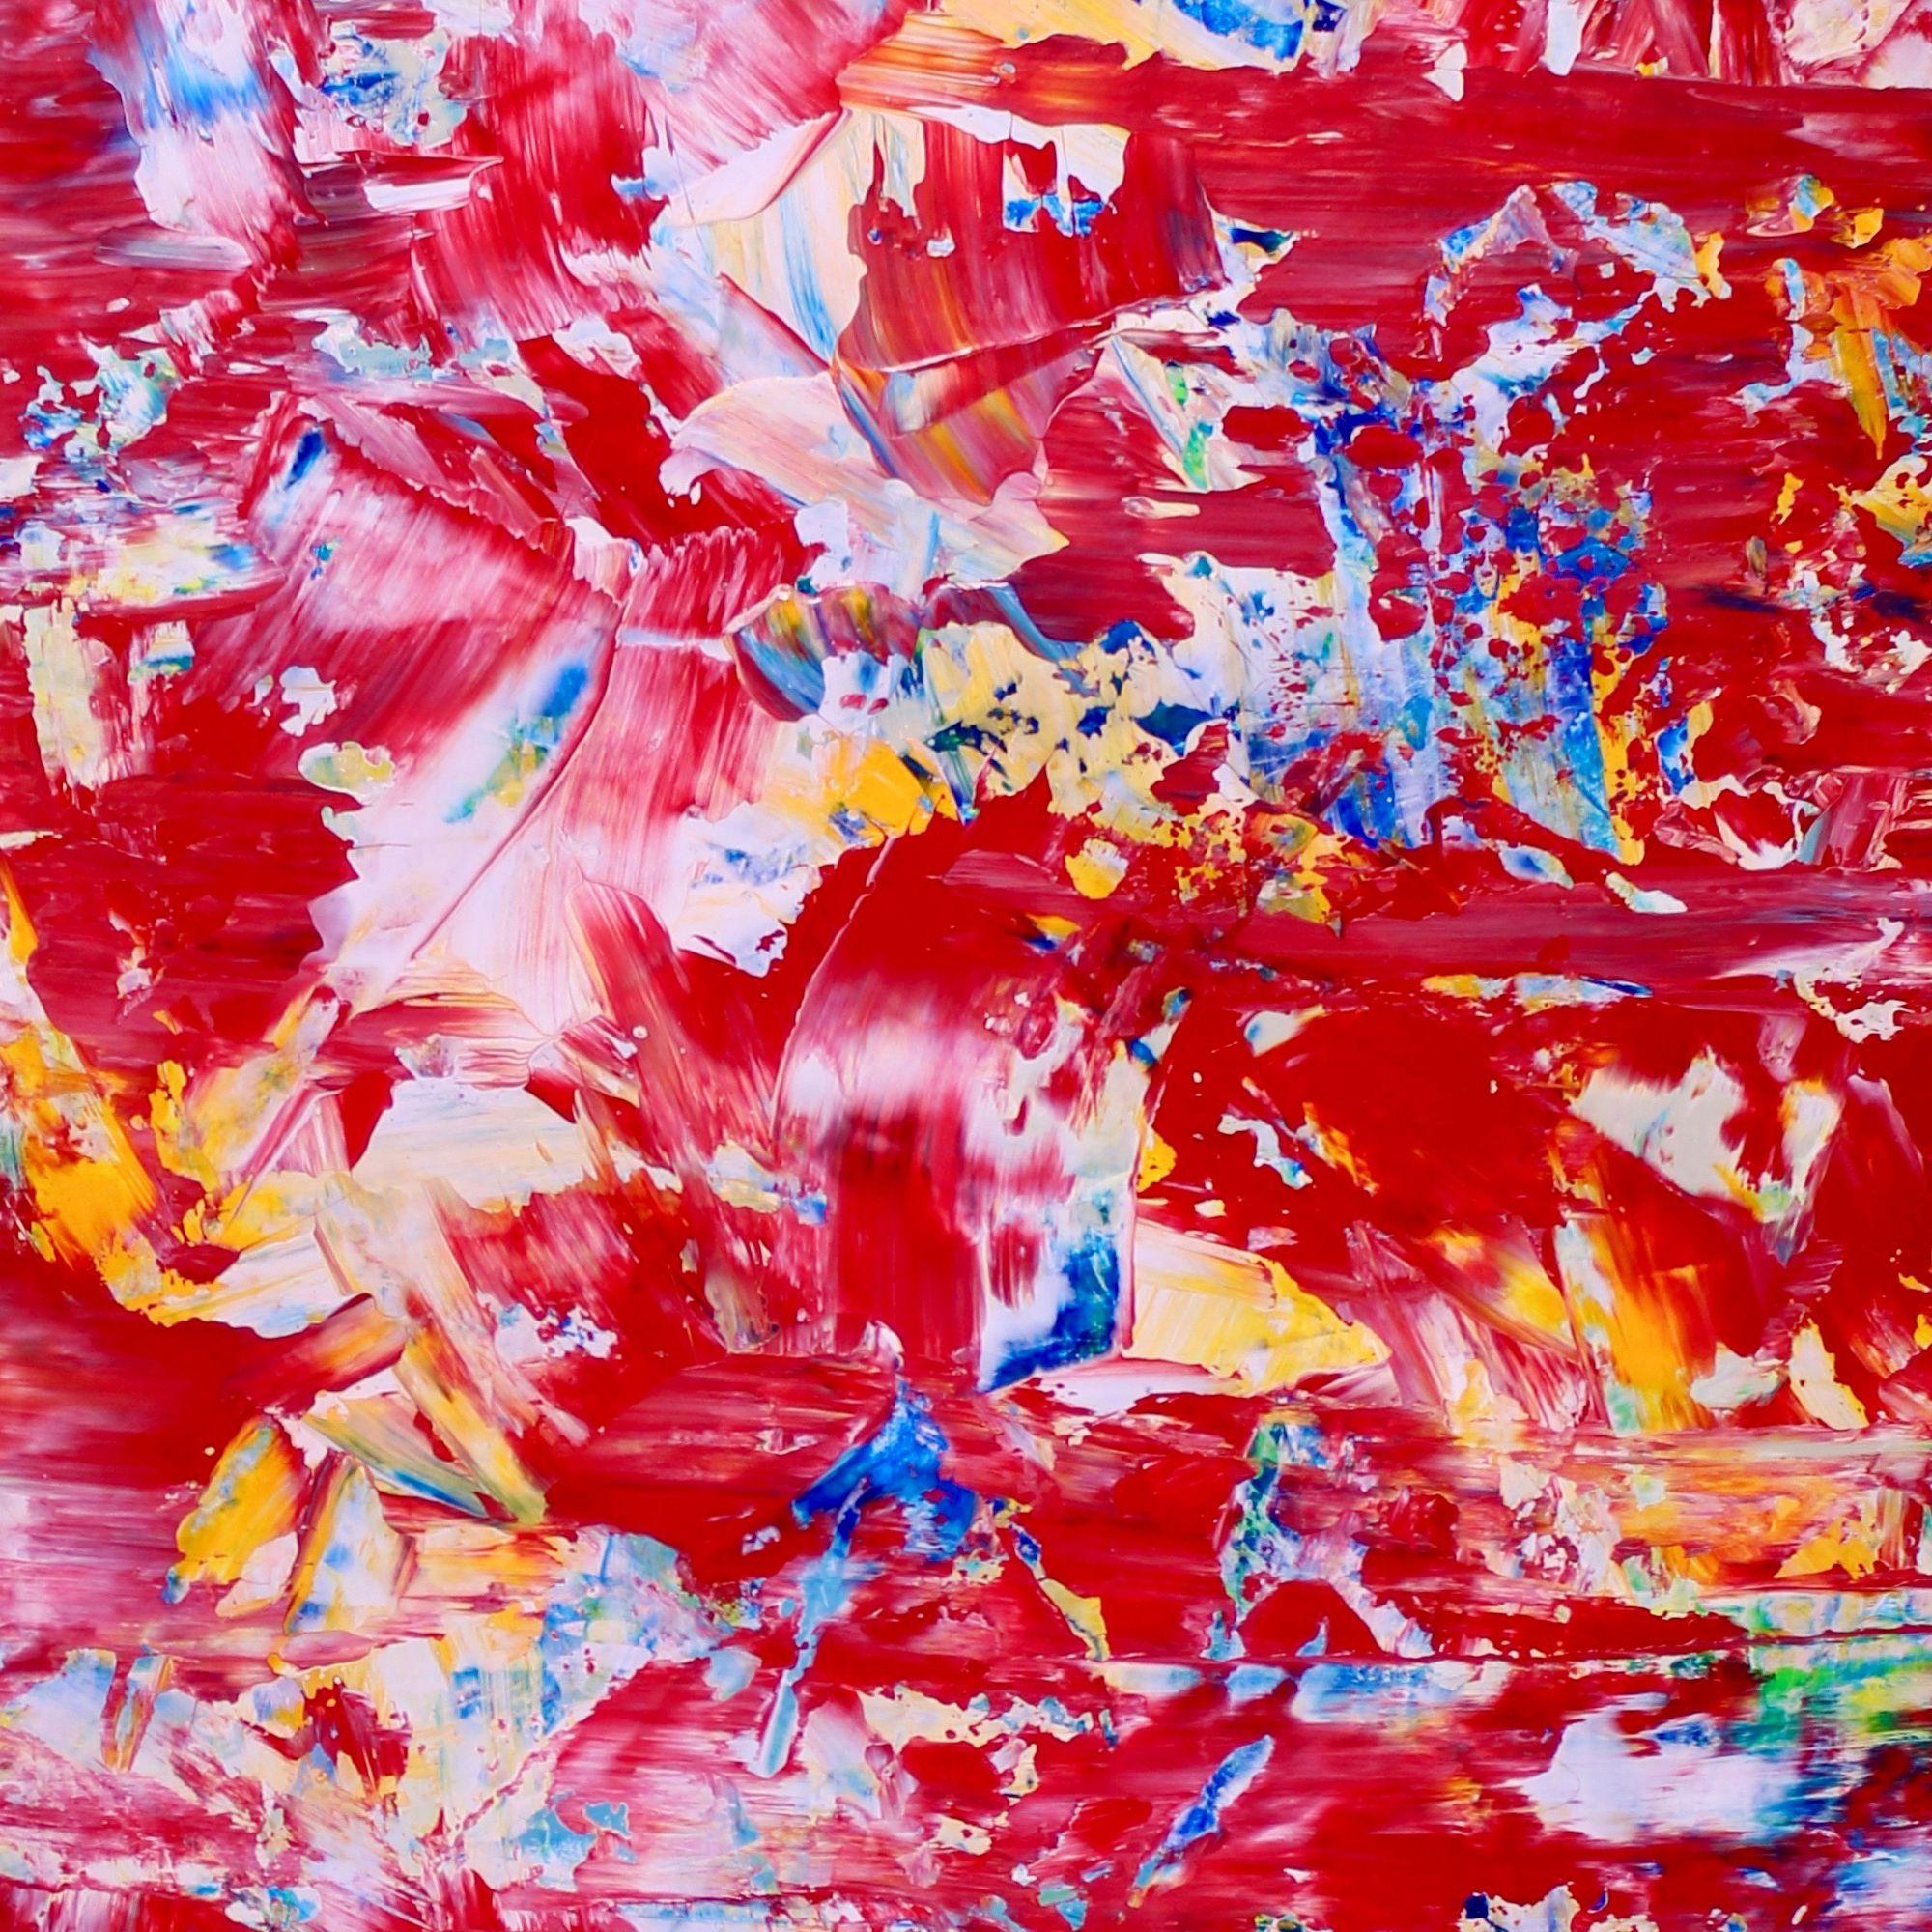 consequences of red, Painting, Acrylic on Canvas - Red Abstract Painting by Nestor Toro